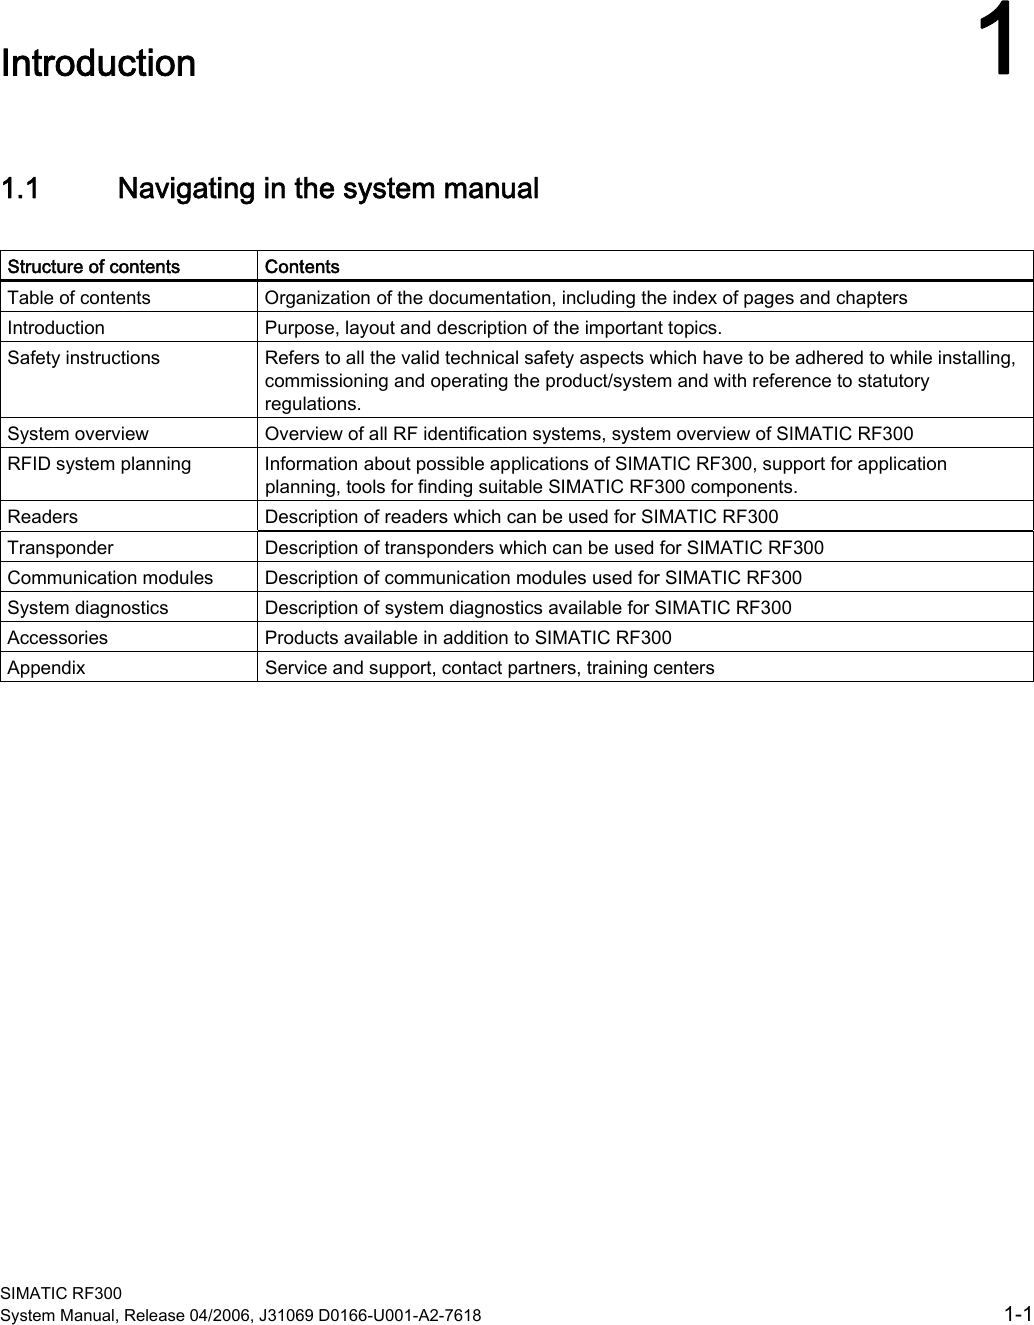  SIMATIC RF300 System Manual, Release 04/2006, J31069 D0166-U001-A2-7618  1-1 Introduction  11.1 1.1 Navigating in the system manual  Structure of contents   Contents Table of contents  Organization of the documentation, including the index of pages and chapters Introduction  Purpose, layout and description of the important topics. Safety instructions  Refers to all the valid technical safety aspects which have to be adhered to while installing, commissioning and operating the product/system and with reference to statutory regulations. System overview  Overview of all RF identification systems, system overview of SIMATIC RF300 RFID system planning  Information about possible applications of SIMATIC RF300, support for application planning, tools for finding suitable SIMATIC RF300 components.  Readers   Description of readers which can be used for SIMATIC RF300 Transponder  Description of transponders which can be used for SIMATIC RF300 Communication modules  Description of communication modules used for SIMATIC RF300 System diagnostics  Description of system diagnostics available for SIMATIC RF300 Accessories  Products available in addition to SIMATIC RF300 Appendix  Service and support, contact partners, training centers  